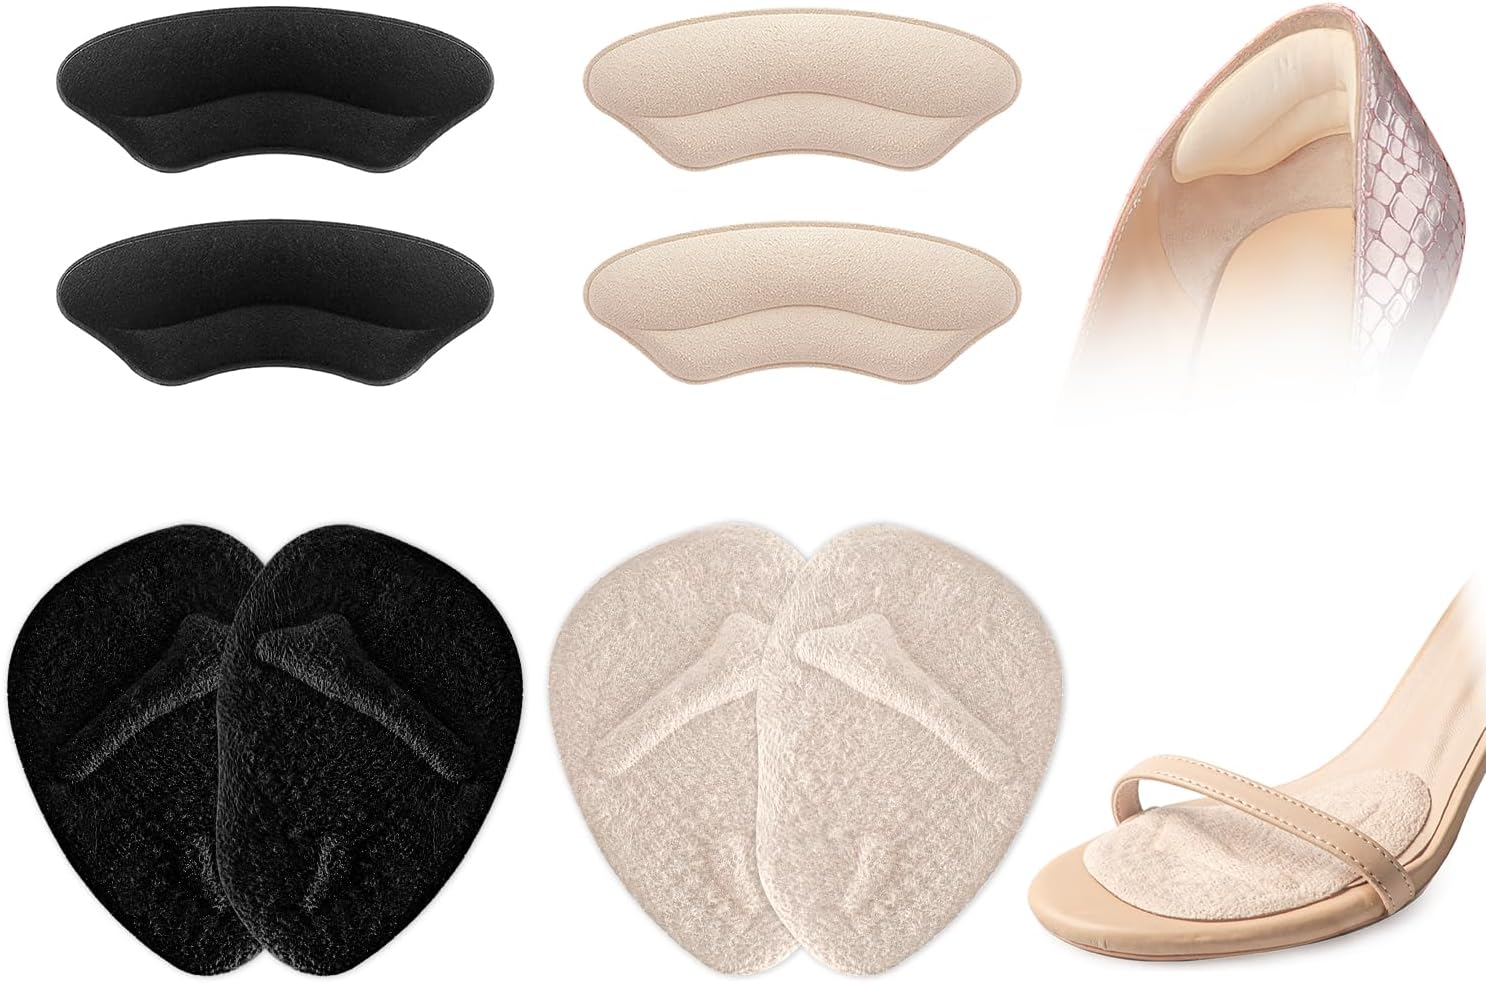 Welcome to our Best Insoles For Heel Pain section, a collection of professionally designed insoles that offer the best solutions for heel pain. Designed for heel pain, our insoles combine comfort and support, designed to help you ease the pain and regain the feeling of lightness in your step.